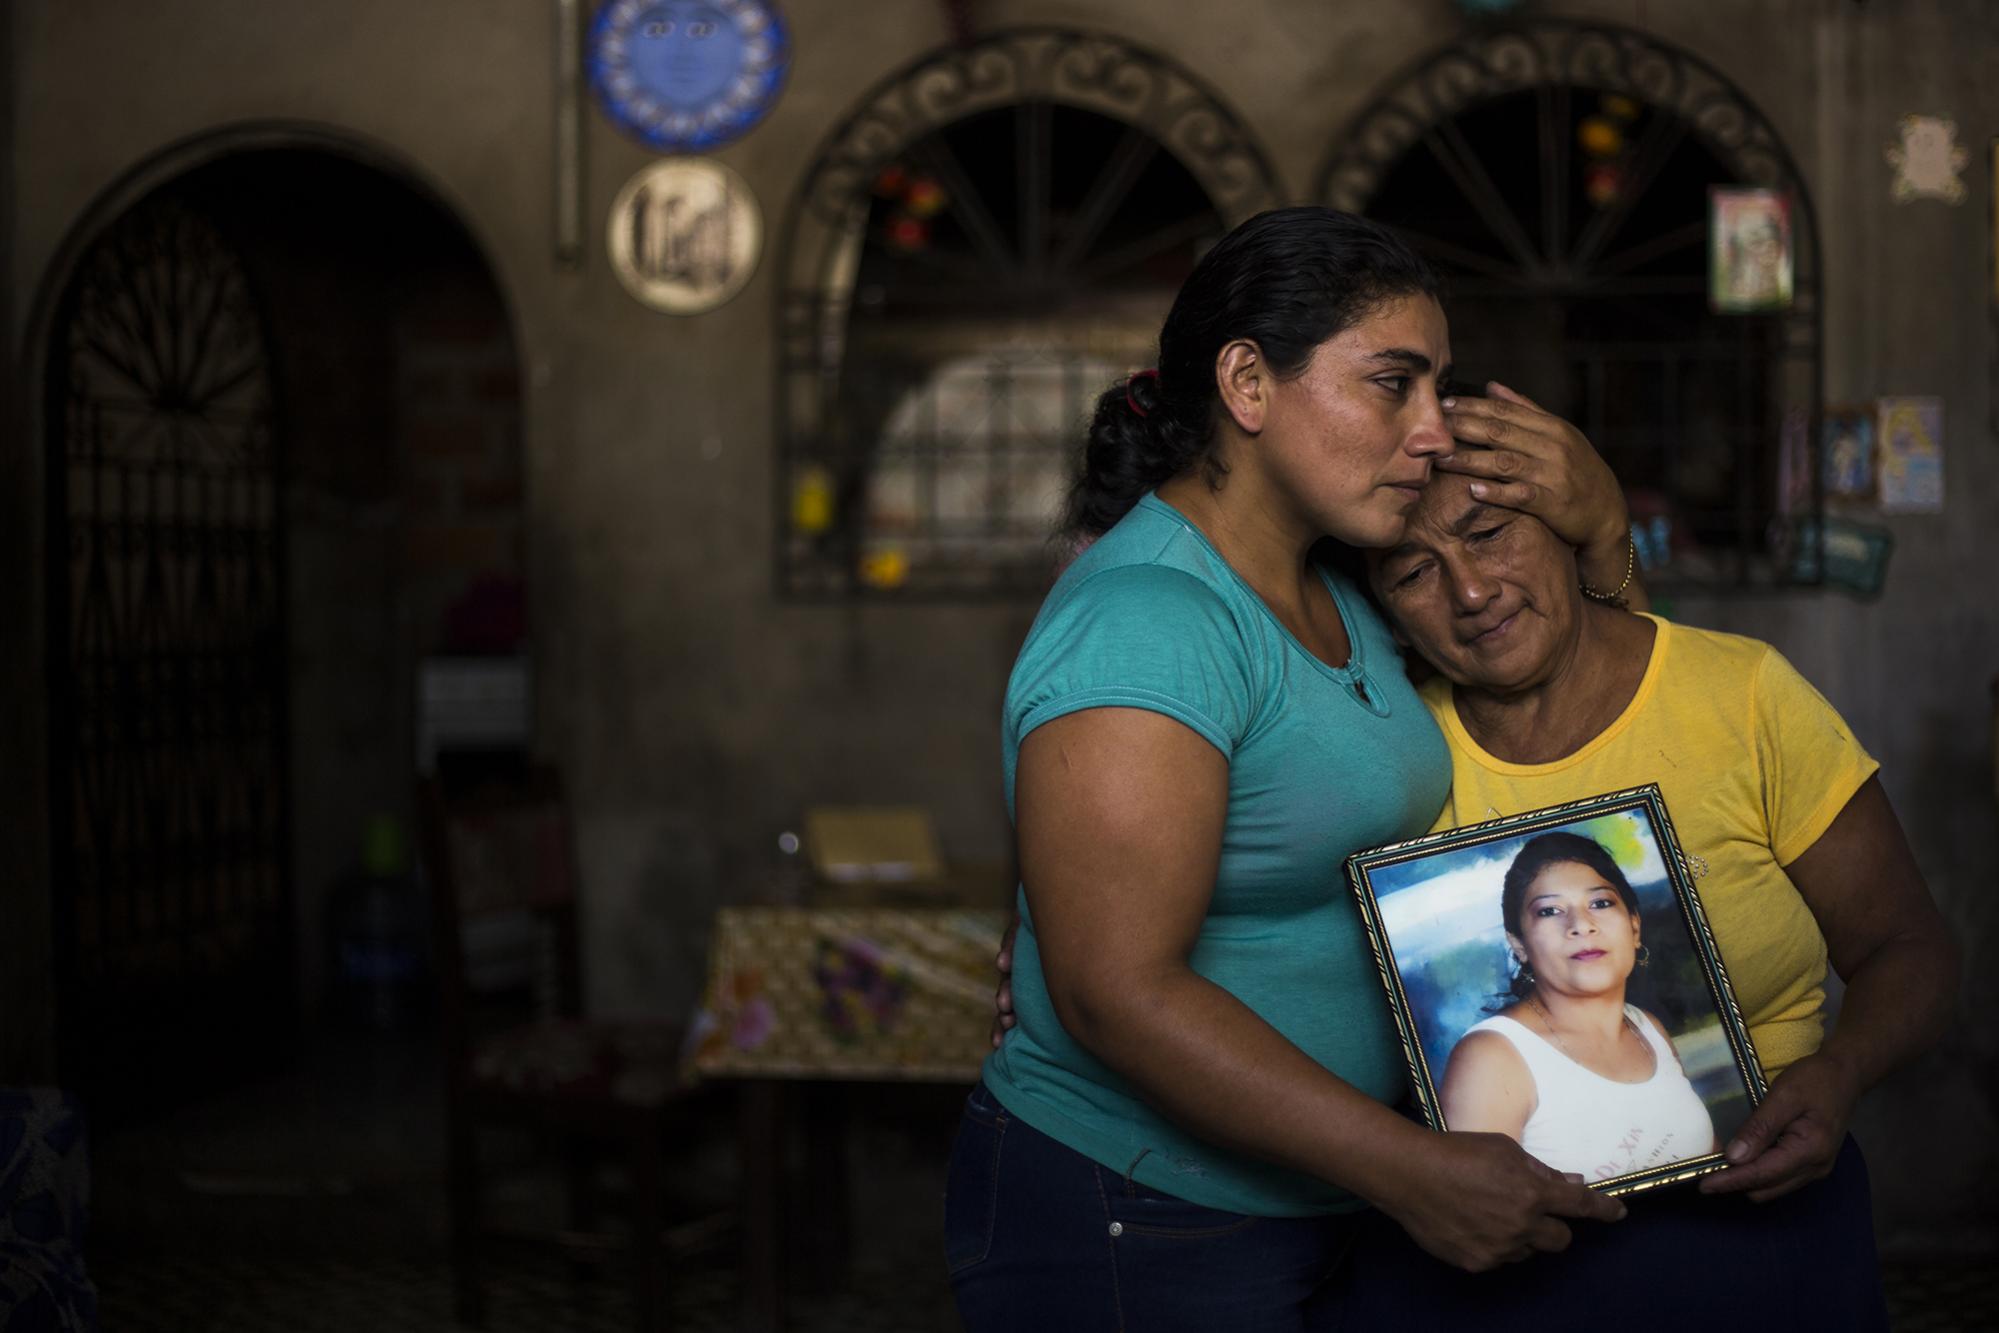 On May 12, 2010 Ana Ruth Ávalos disappeared from the beauty salon where she worked, in the community of La Esperanza, Santiago Texacuangos municipality, El Salvador. She was 25 years old. Now, her mother, Edith, and her sister, Cecilia (pictured here), know that the owner of the beauty salon forced Ana Ruth to travel to the United States with an underage girl whose parents had paid for the trip. Months later, following the killing of 72 migrants in Tamaulipas in August 2010, Cecilia responded to a public call from the Salvadoran and Mexican governments for family members of the disappeared to submit their DNA for testing, in an effort to identify the victims of the massacre. She knew that Ana Ruth hadn’t taken that route, but she sensed that this was the way to find her. She waited for two more years. On Sept. 5, 2012, the Salvadoran Ministry of Foreign Affairs, using the data she had submitted to the DNA bank, confirmed that Ana Ruth’s body had been found in the Arizona desert, about 20 kilometers from Tucson. Photo: Víctor Peña.